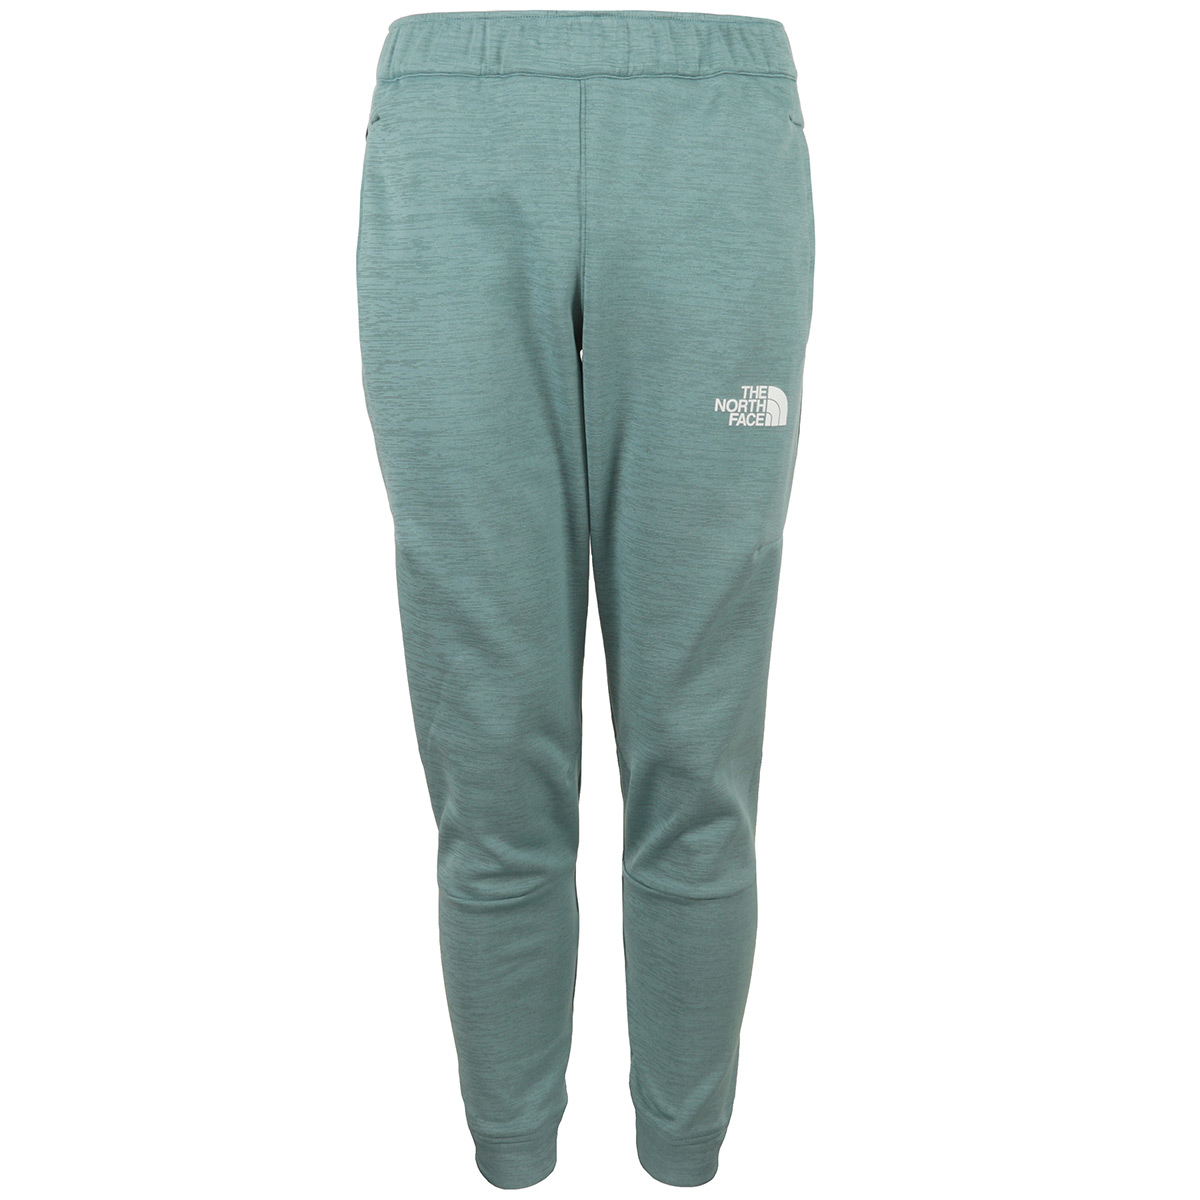 The North Face Pant Fleece